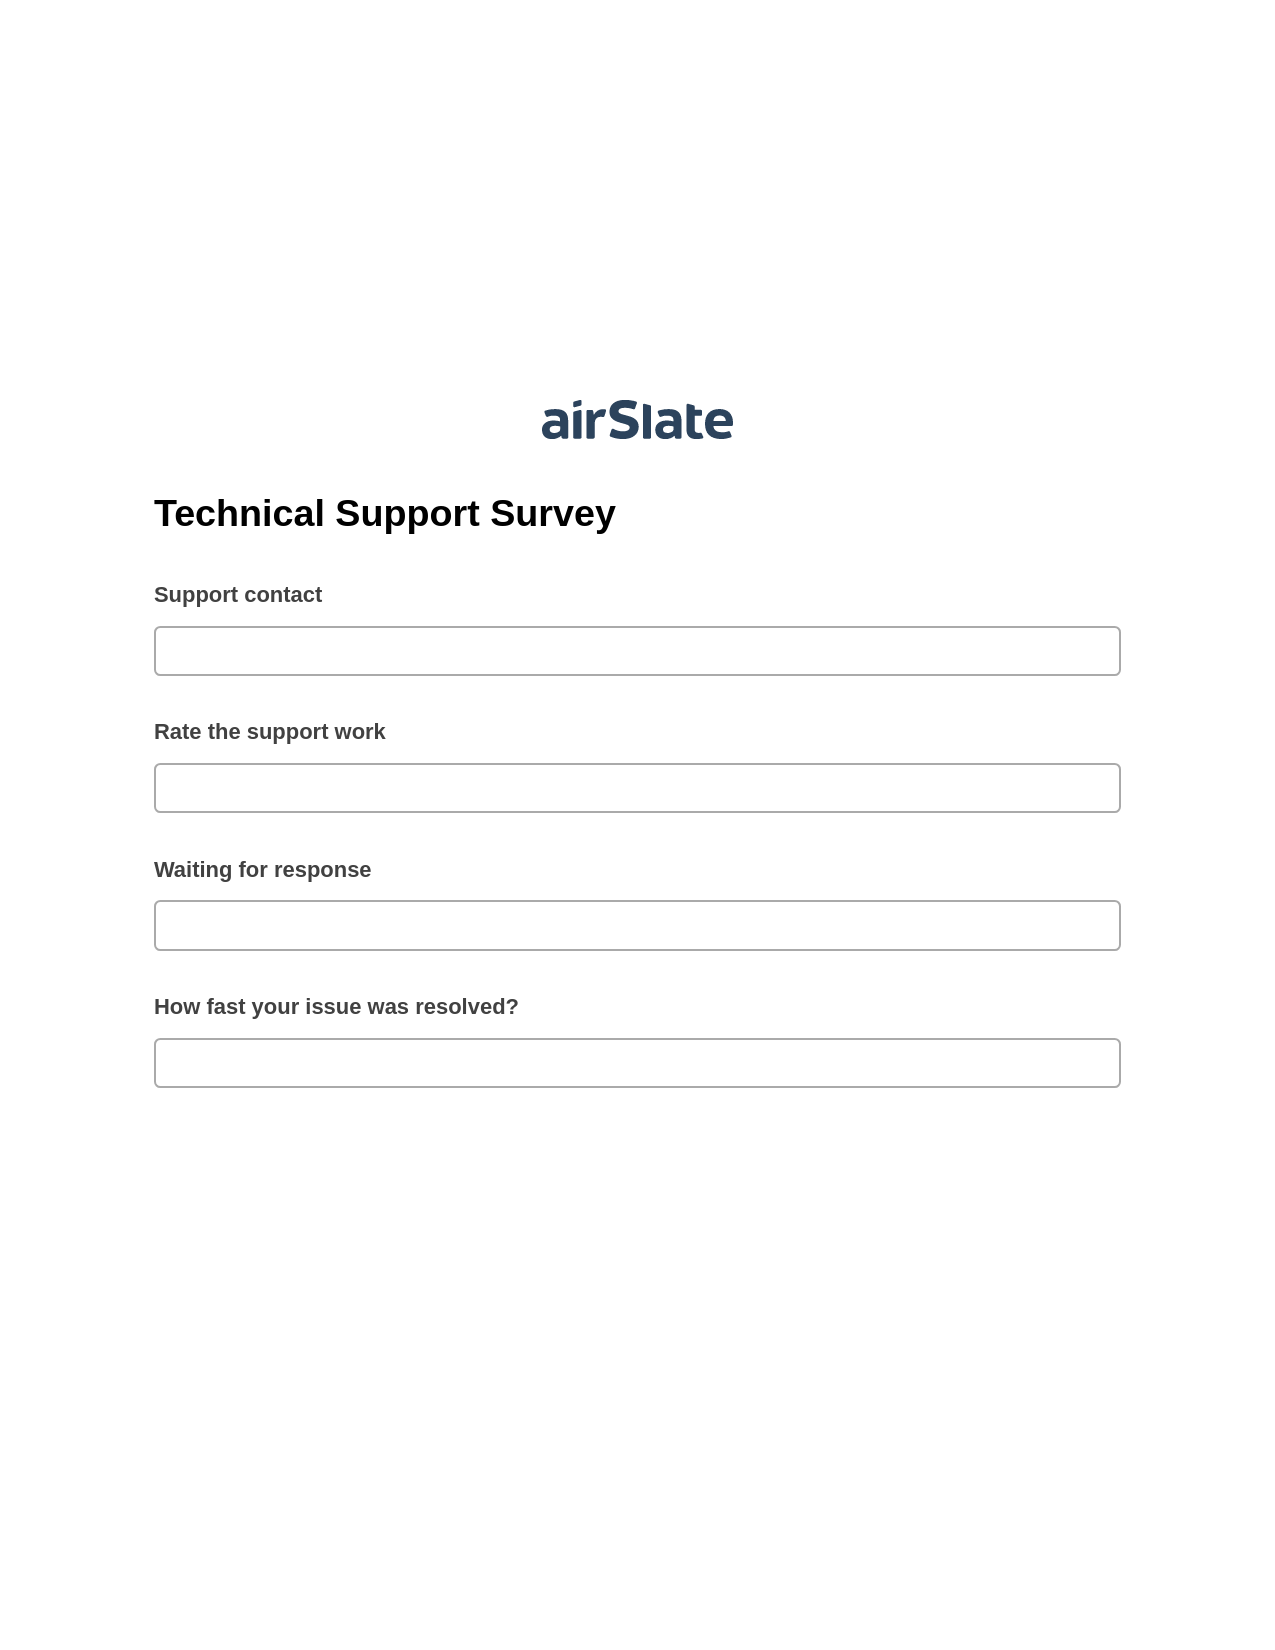 Technical Support Survey Pre-fill from CSV File Bot, Hide Signatures Bot, Export to Salesforce Record Bot